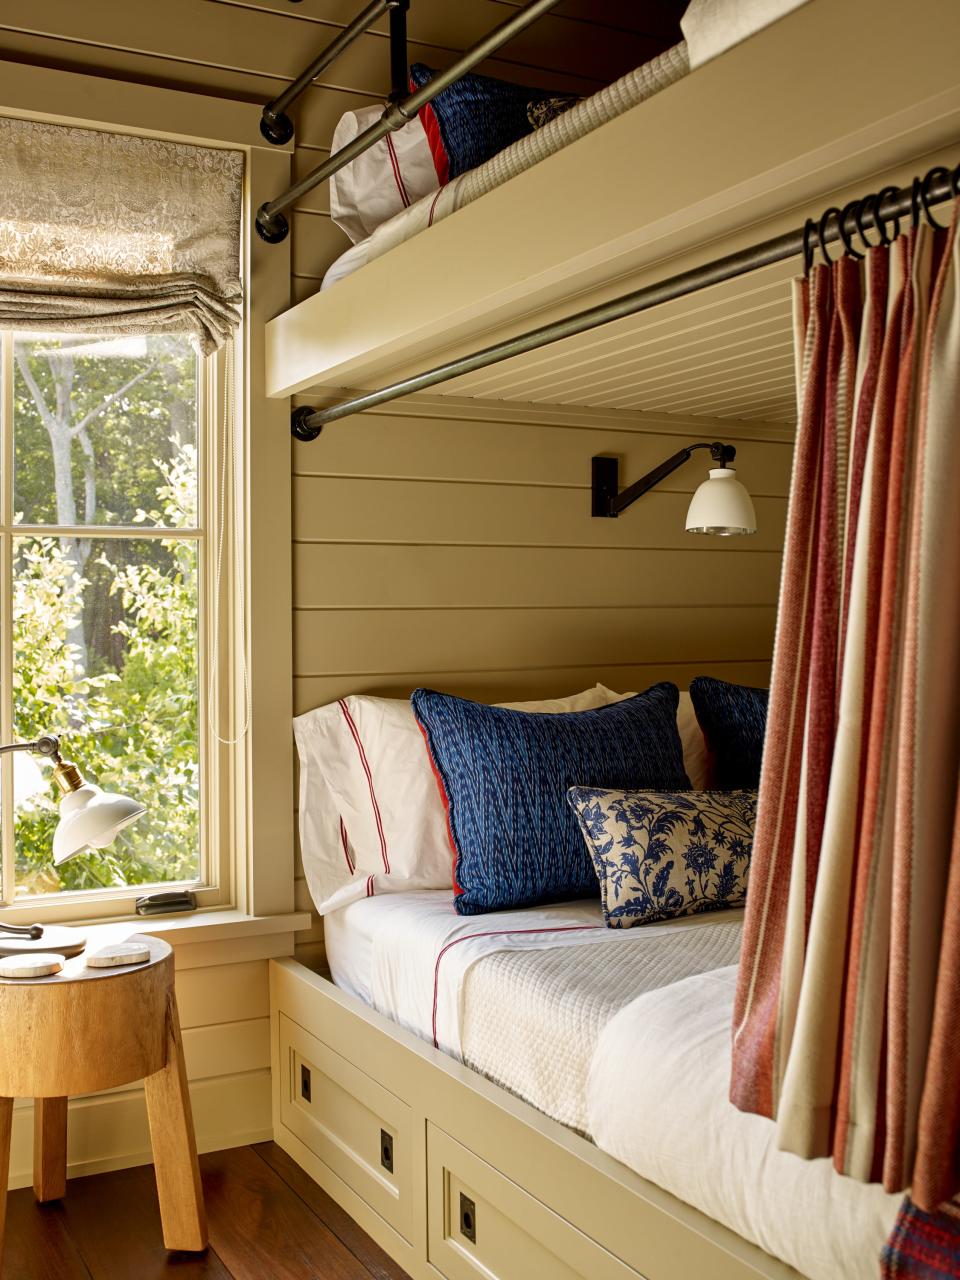 Inspired by the tight living quarters seen on boats near the house, Lippmann designed built-in drawers that hold extra blankets in this bunk room. Beds with iron pipe privacy rods by Cumberland Ironworks and custom curtains in wool by Duralee can be seen. The paint color is Light Stone by Farrow & Ball.